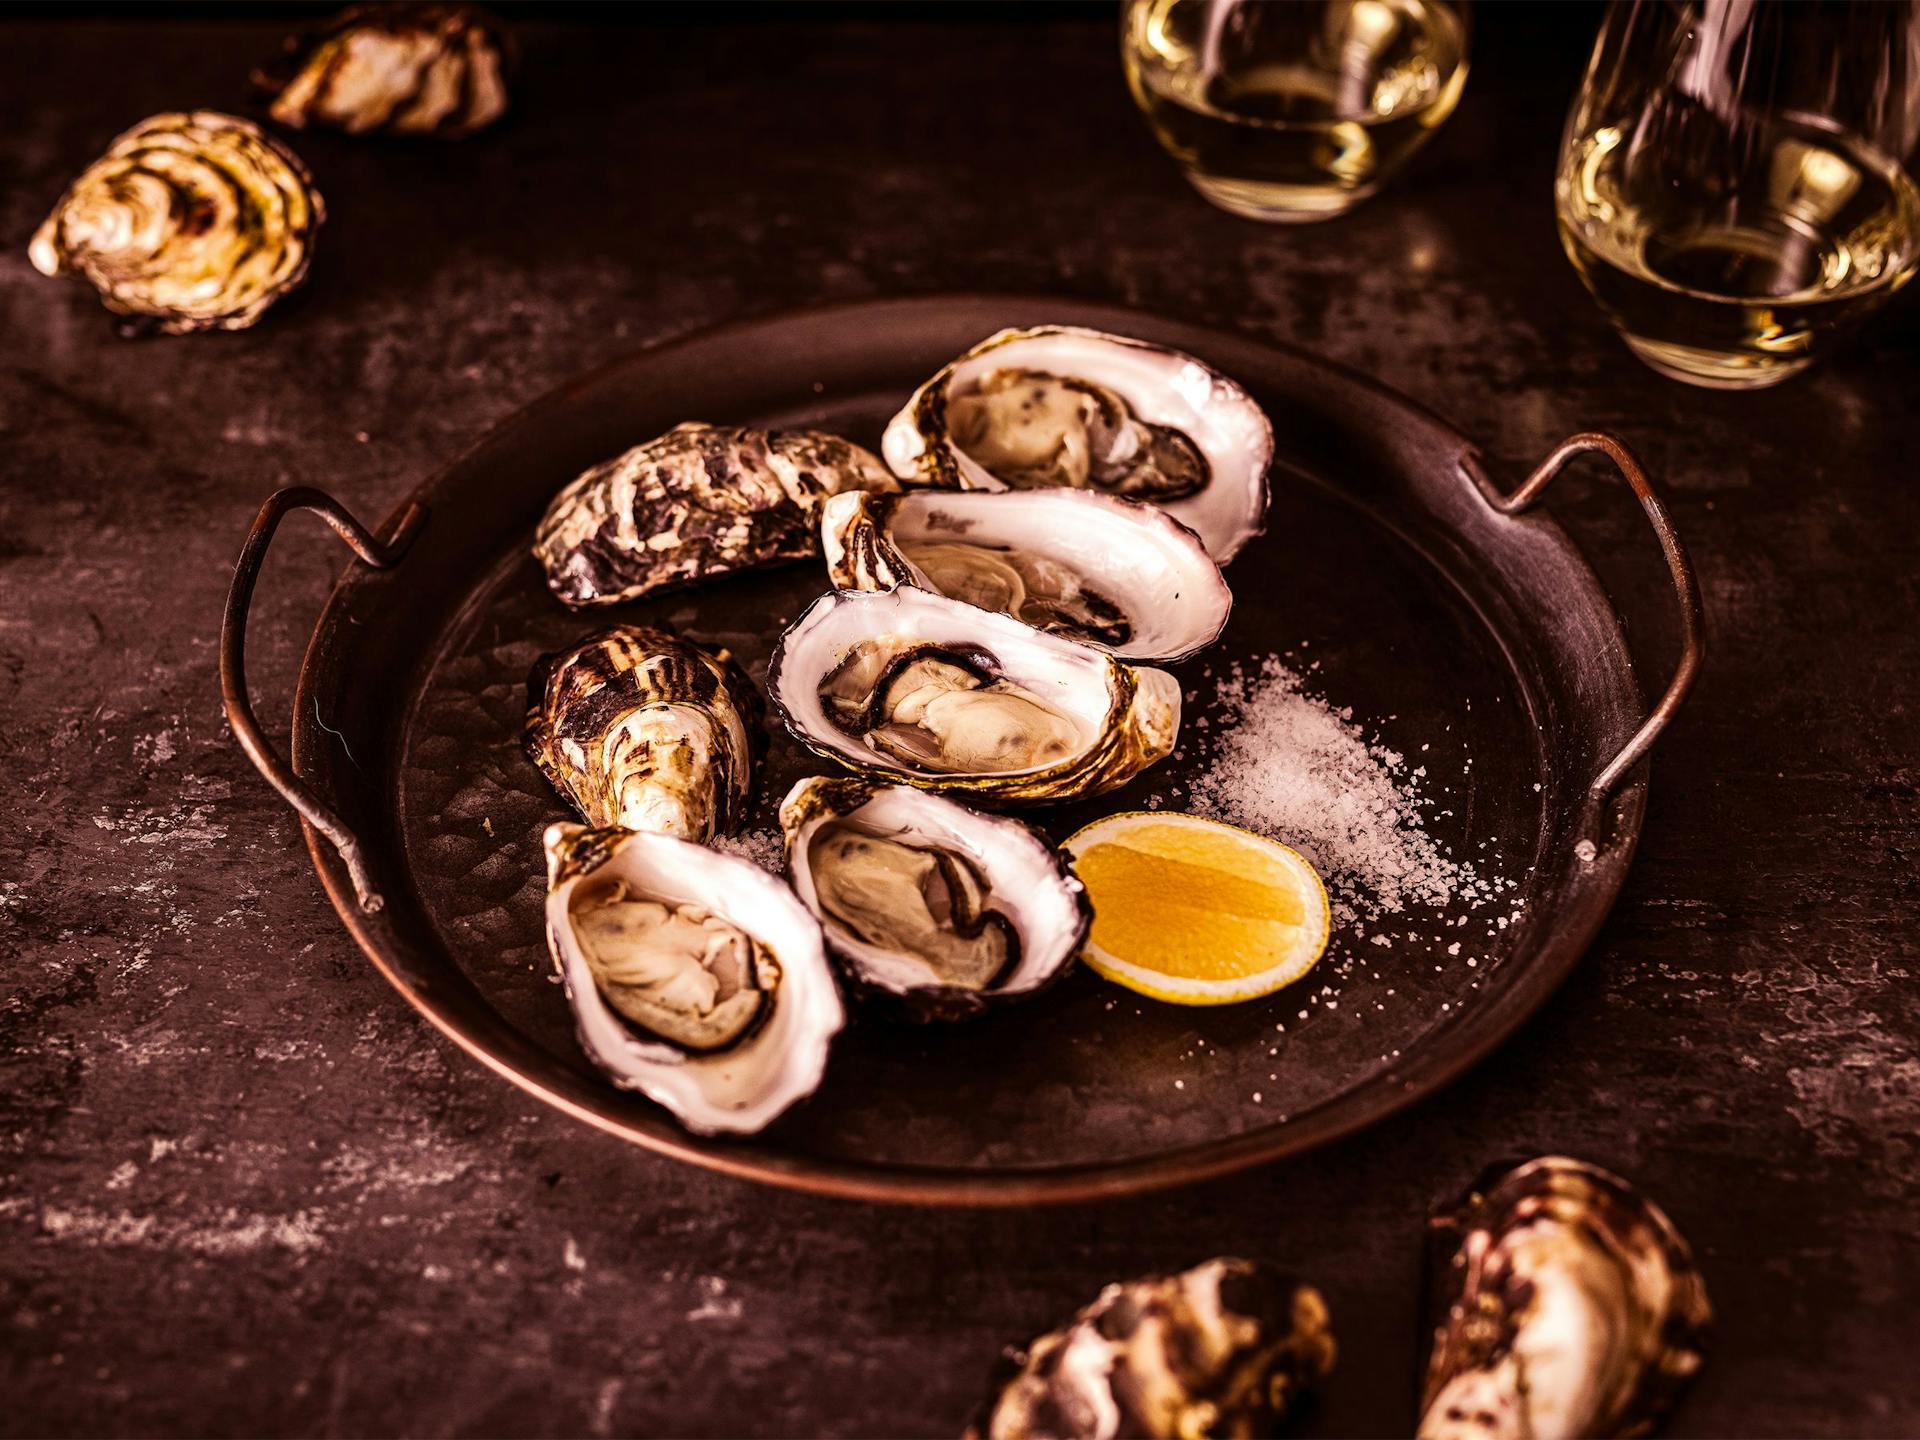 Five shucked oysters lie in a pan with salt, lemon and various unshucked oysters. 